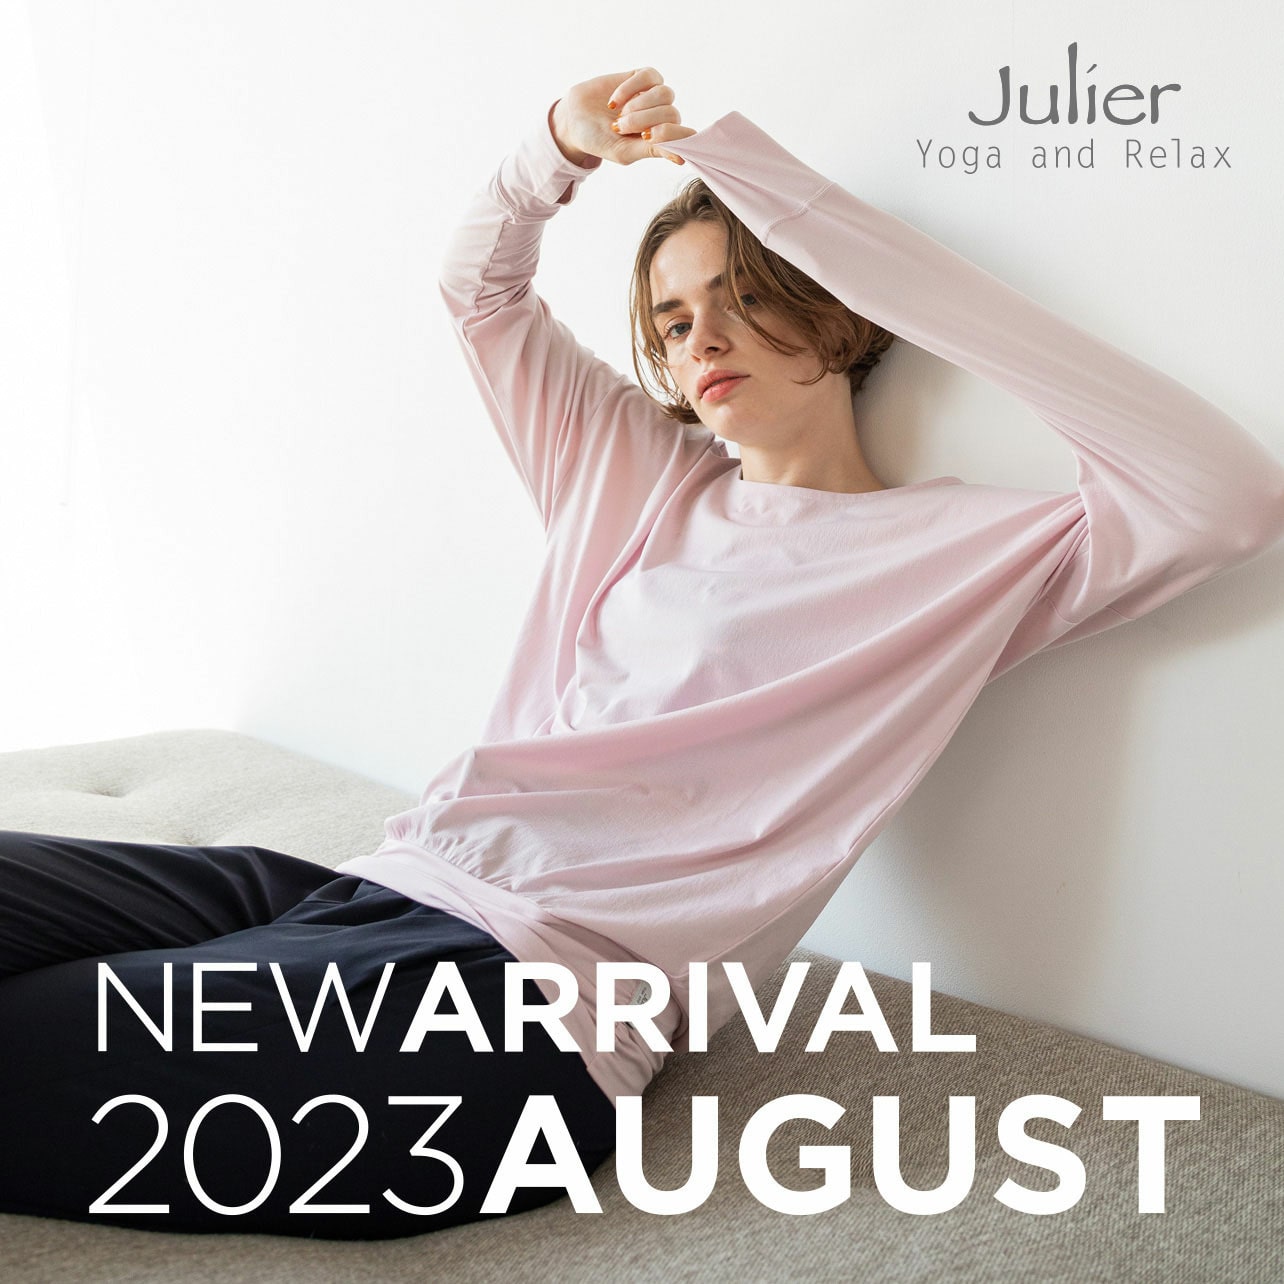 2023 AUGUST NEW ARRIVAL